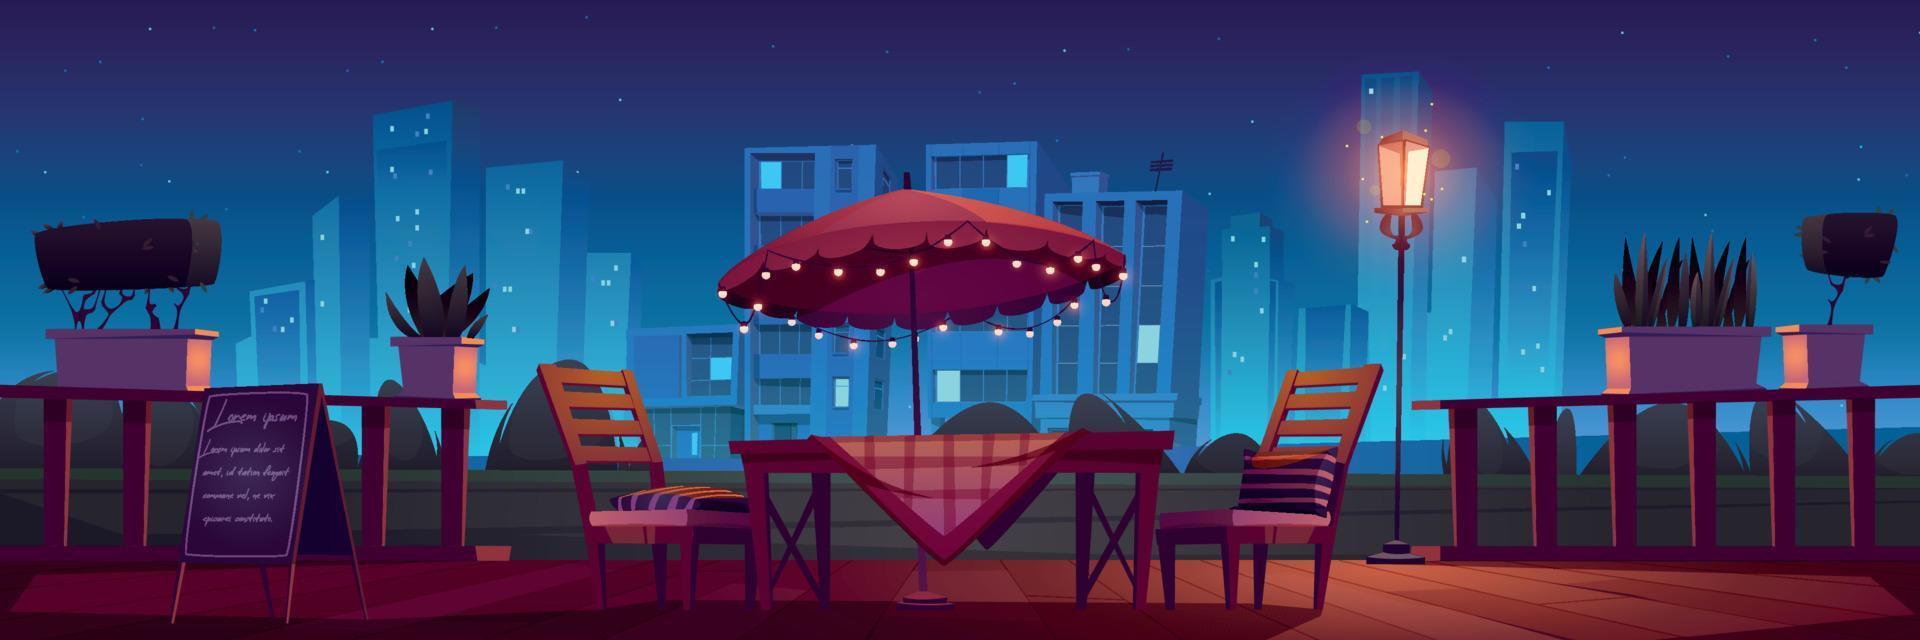 Cafe or restaurant terrace at night vector